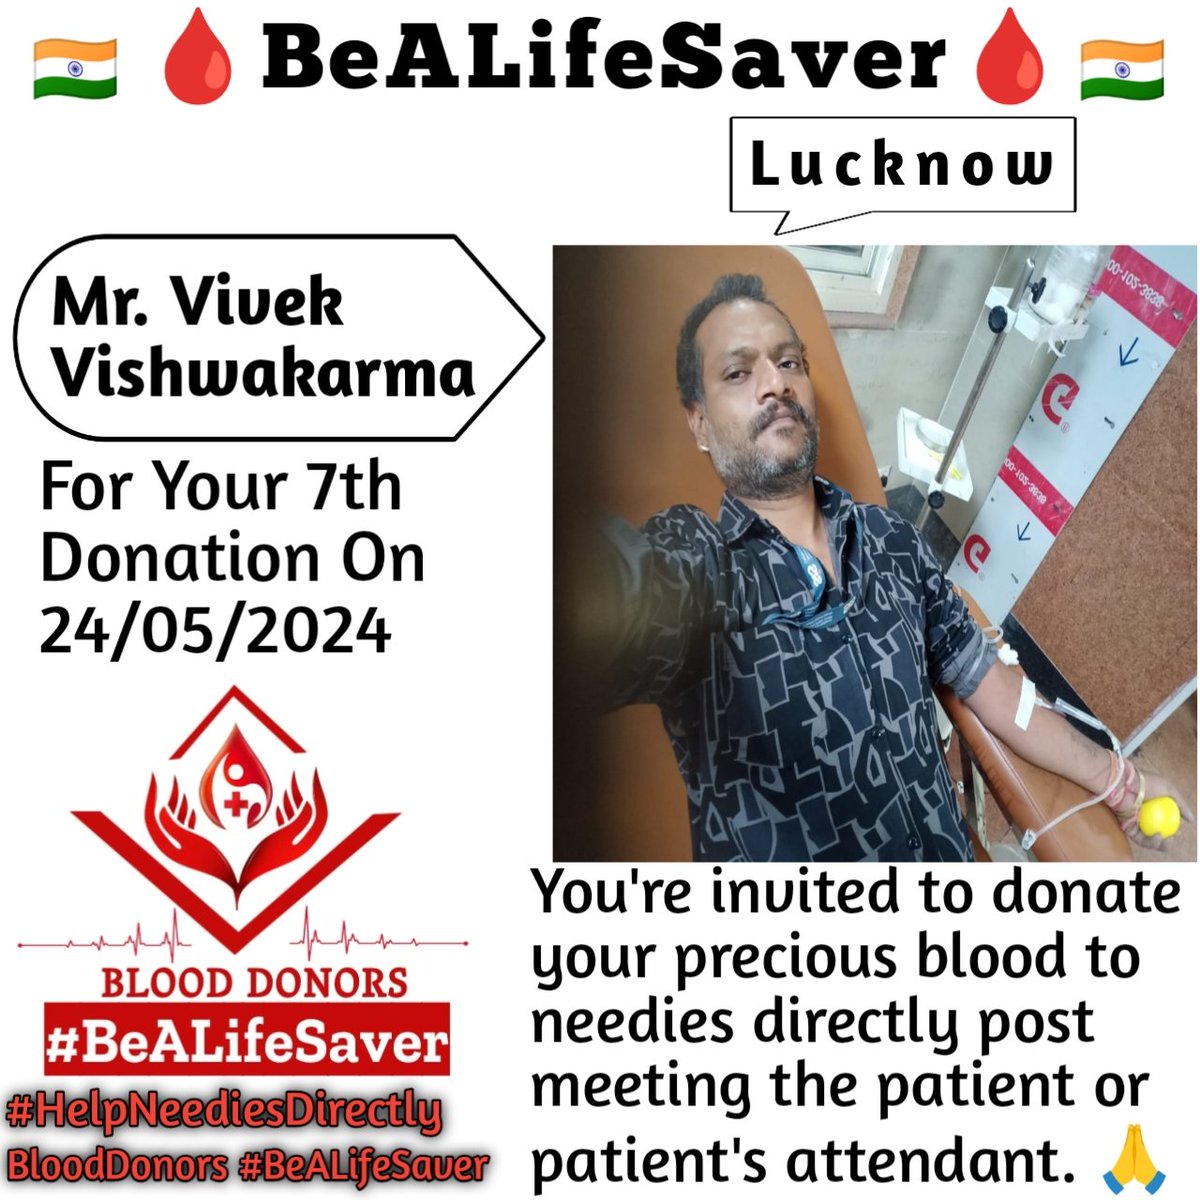 Lucknow BeALifeSaver Kudos_Mr_Vivek_Vishwakarma_Ji Today's hero Mr. Vivek_Vishwakarma Ji donated blood in Lucknow for the 7th Time for one of the needies. Heartfelt Gratitude and Respect to Vivek Vishwakarma Ji for his blood donation for Patient admitted in Lucknow.